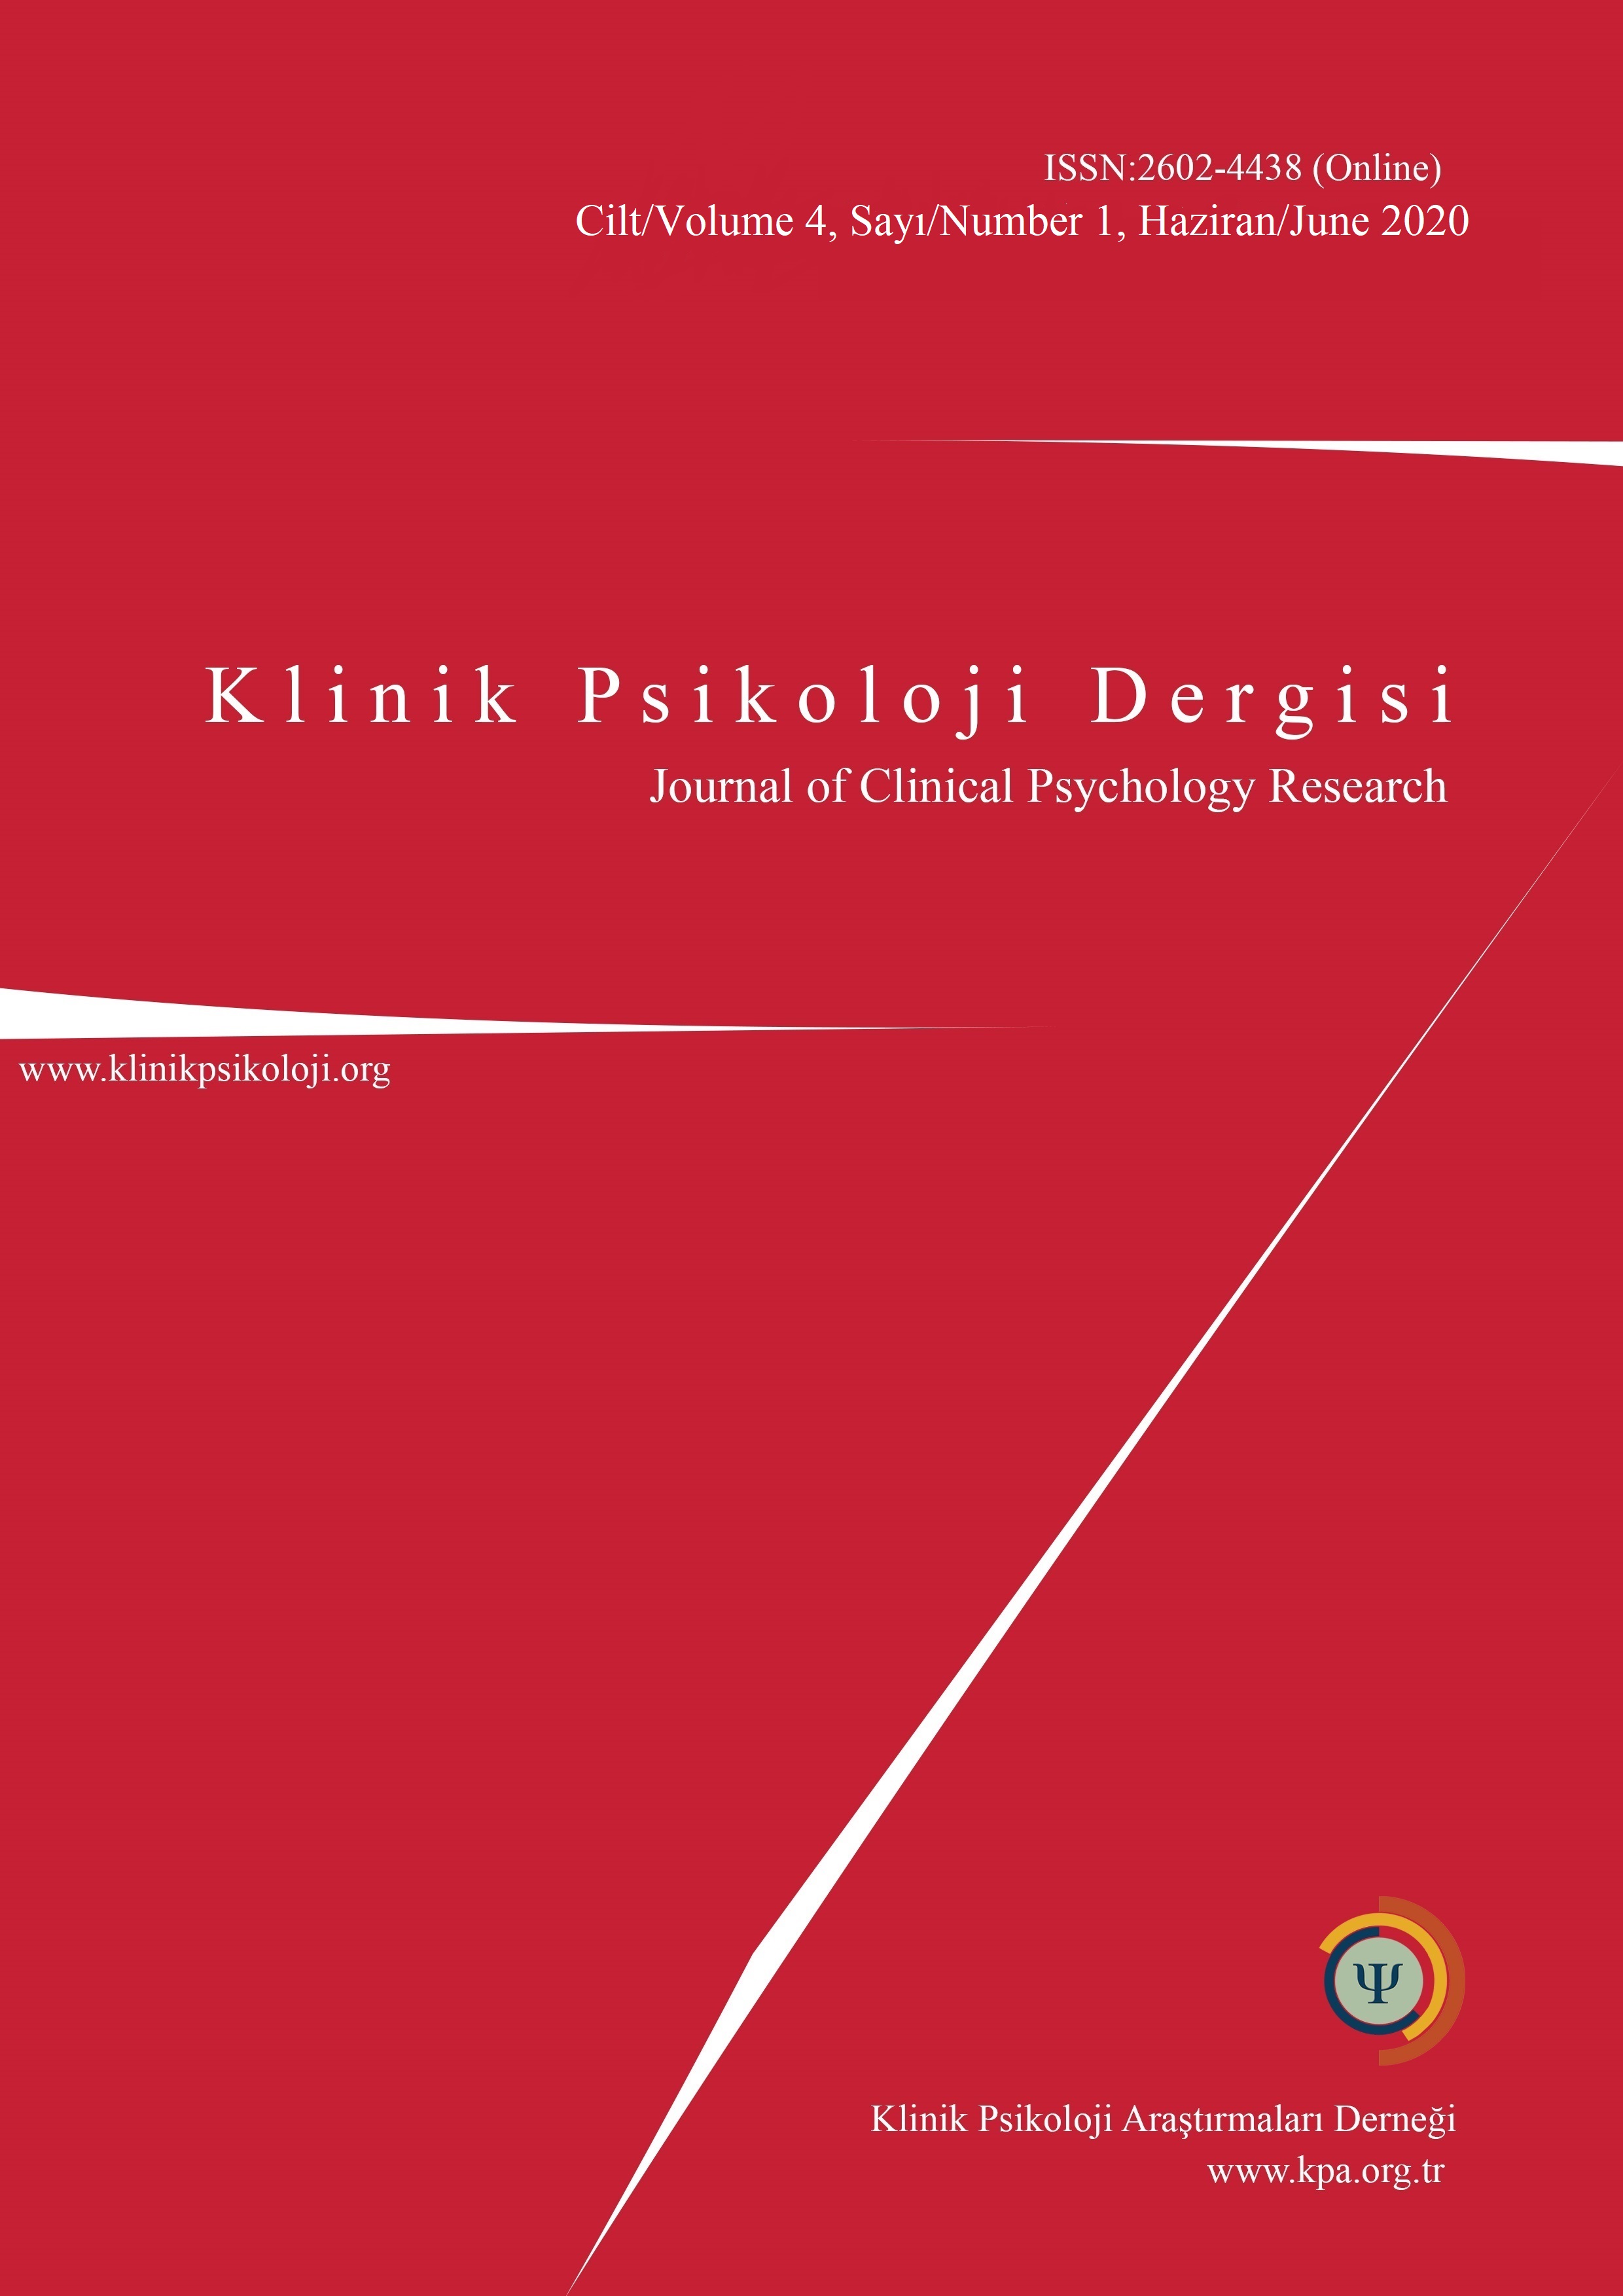 The psychometric properties of the Turkish adaptation of the Health of the Nation Outcome Scales for Children and Adolescents (HoNOSCA) Cover Image